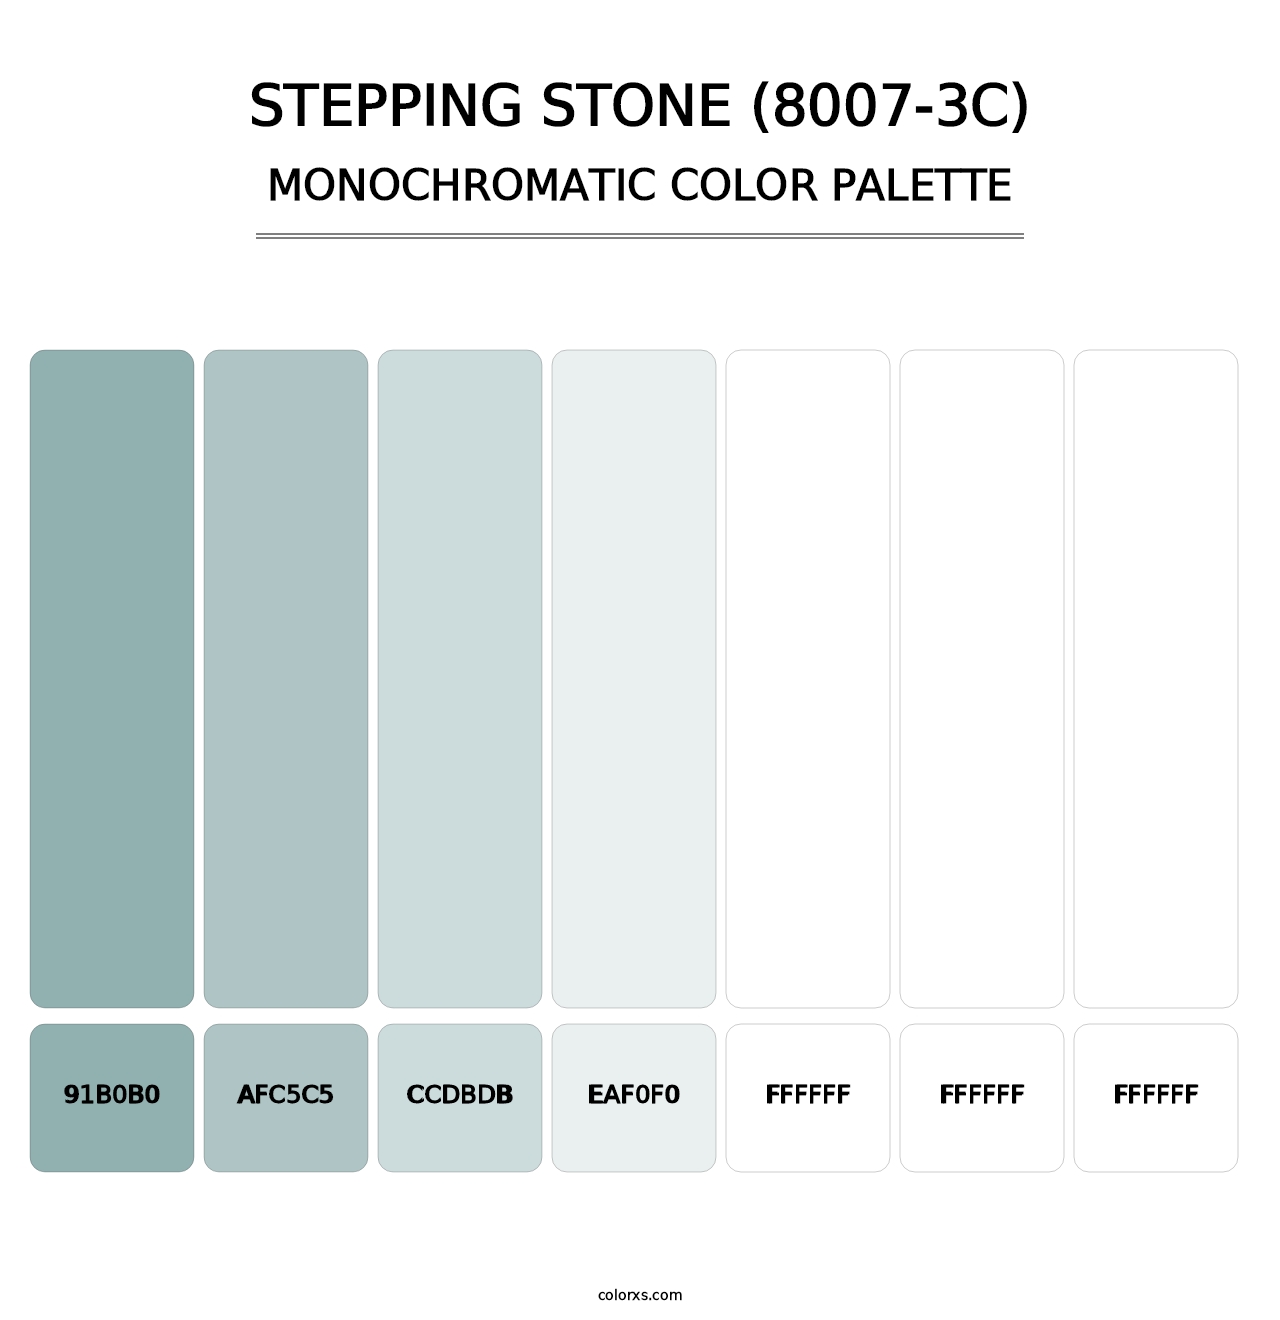 Stepping Stone (8007-3C) - Monochromatic Color Palette